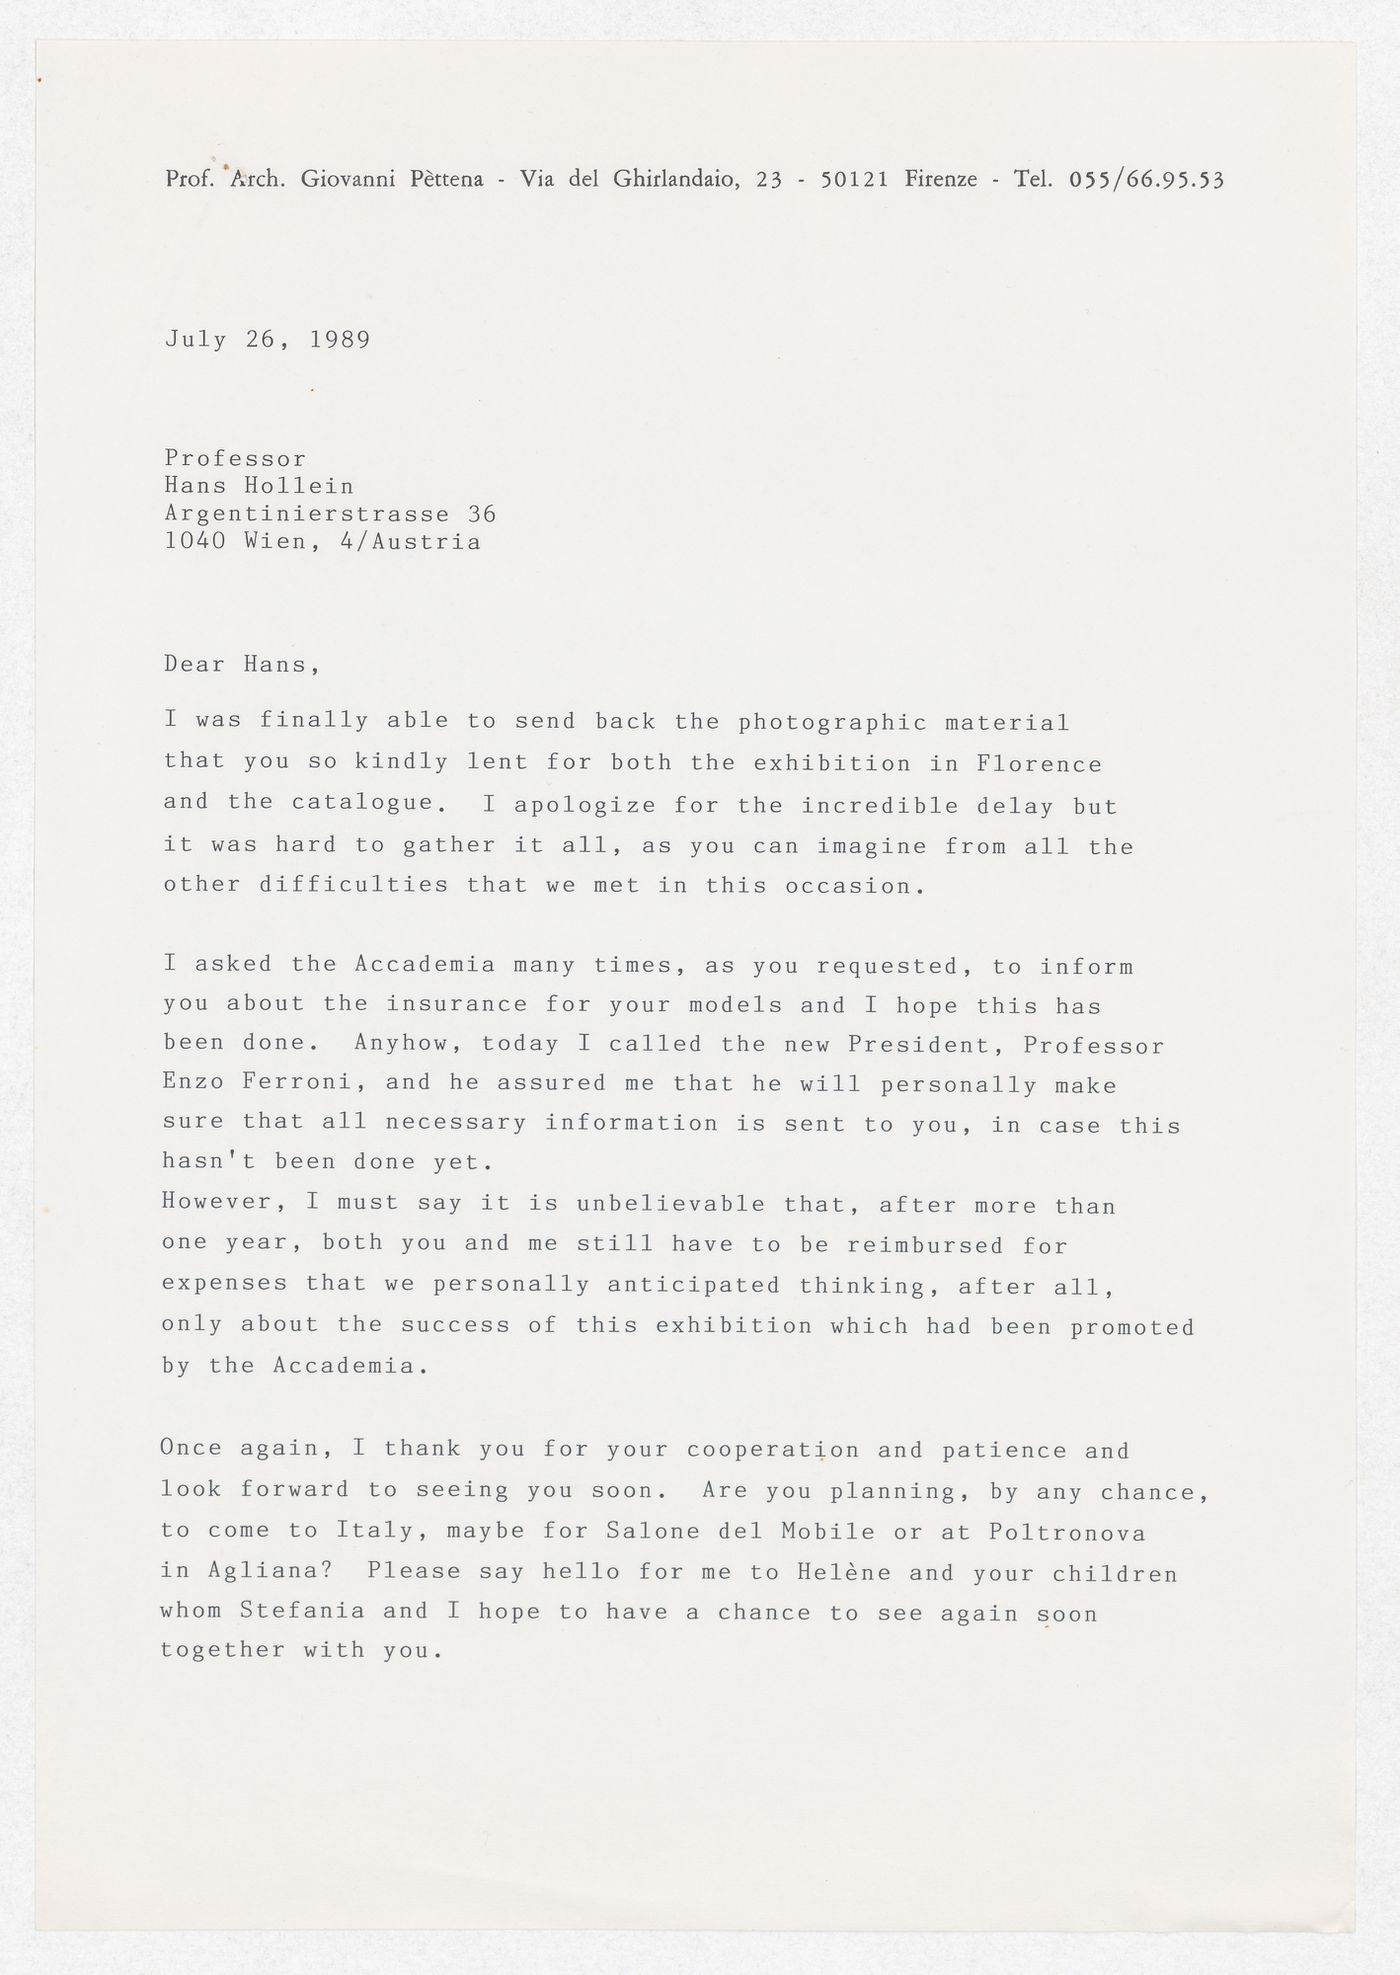 Correspondence from Gianni Pettena to Hans Hollein for the exhibition Hans Hollein. Opere 1960-1988